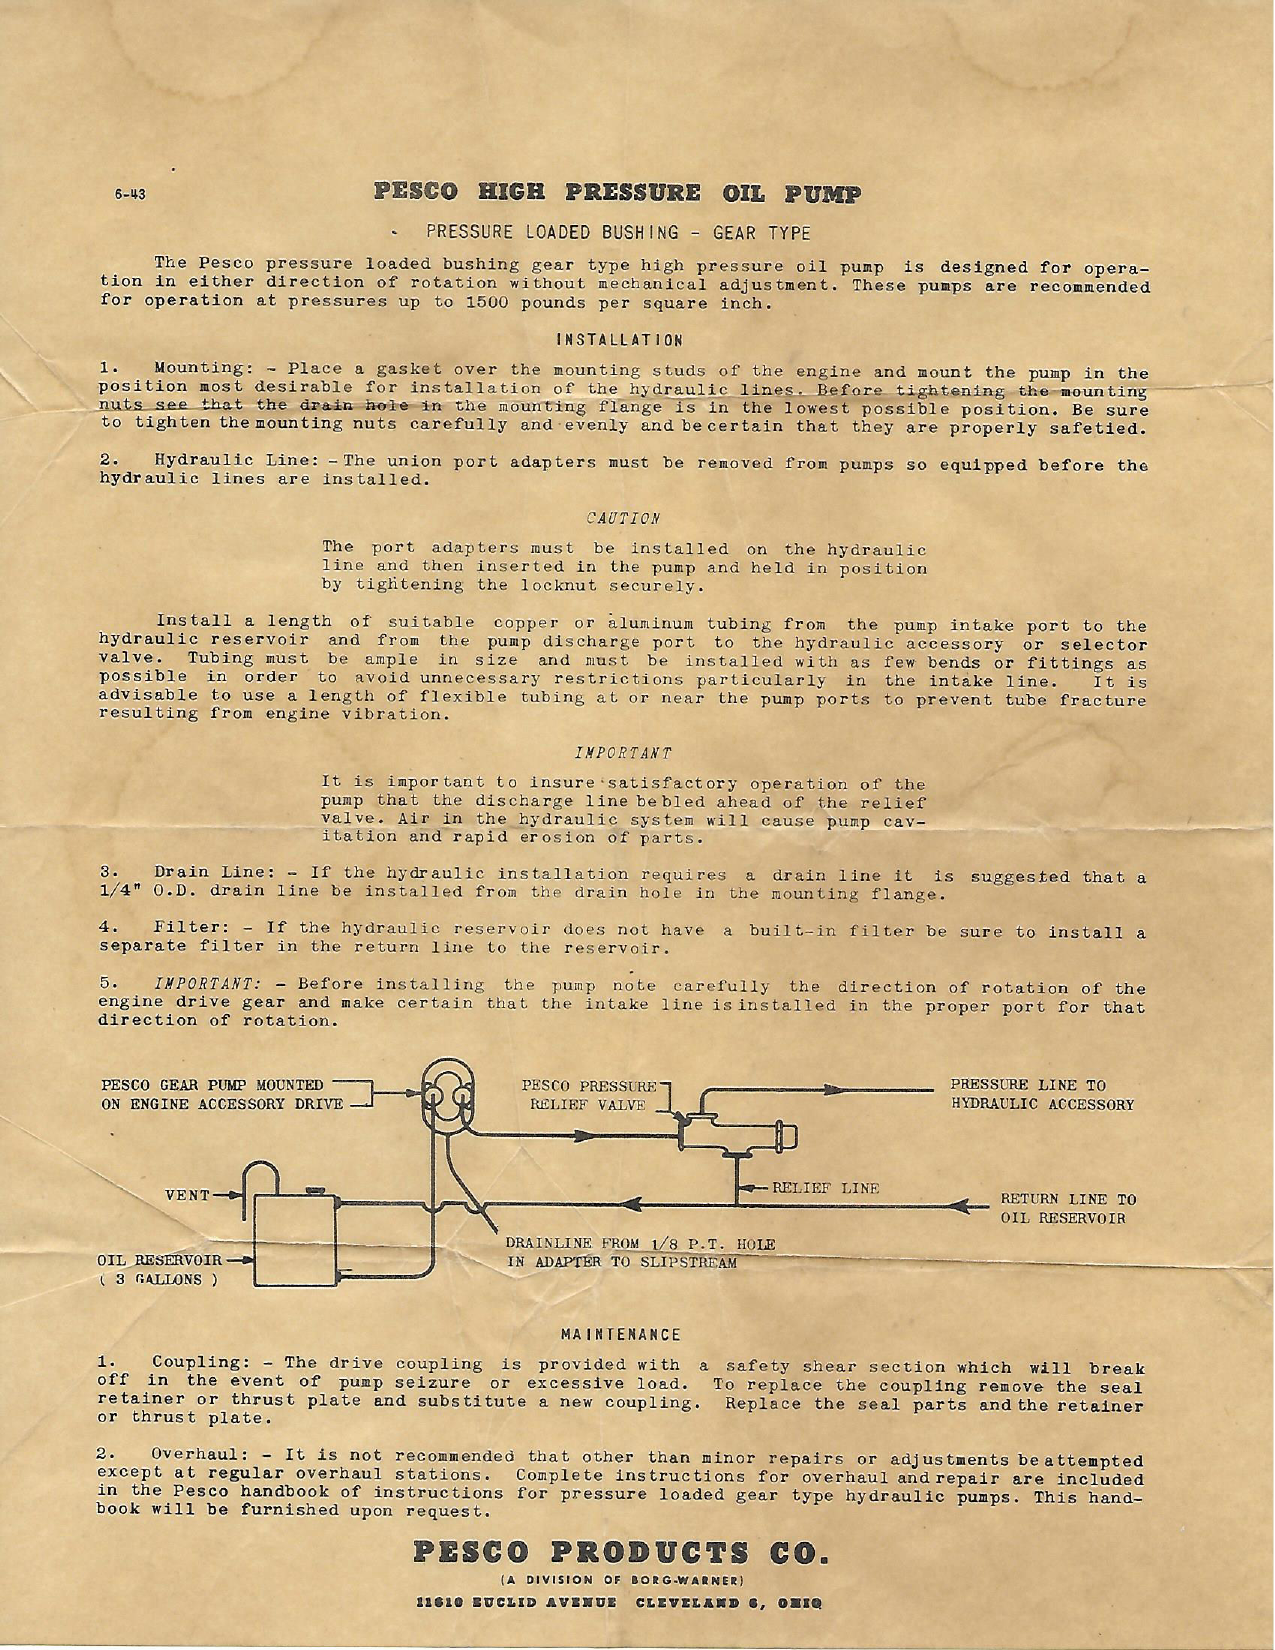 Sample page 1 from AirCorps Library document: Instructions for Pesco High Pressure Oil Pump